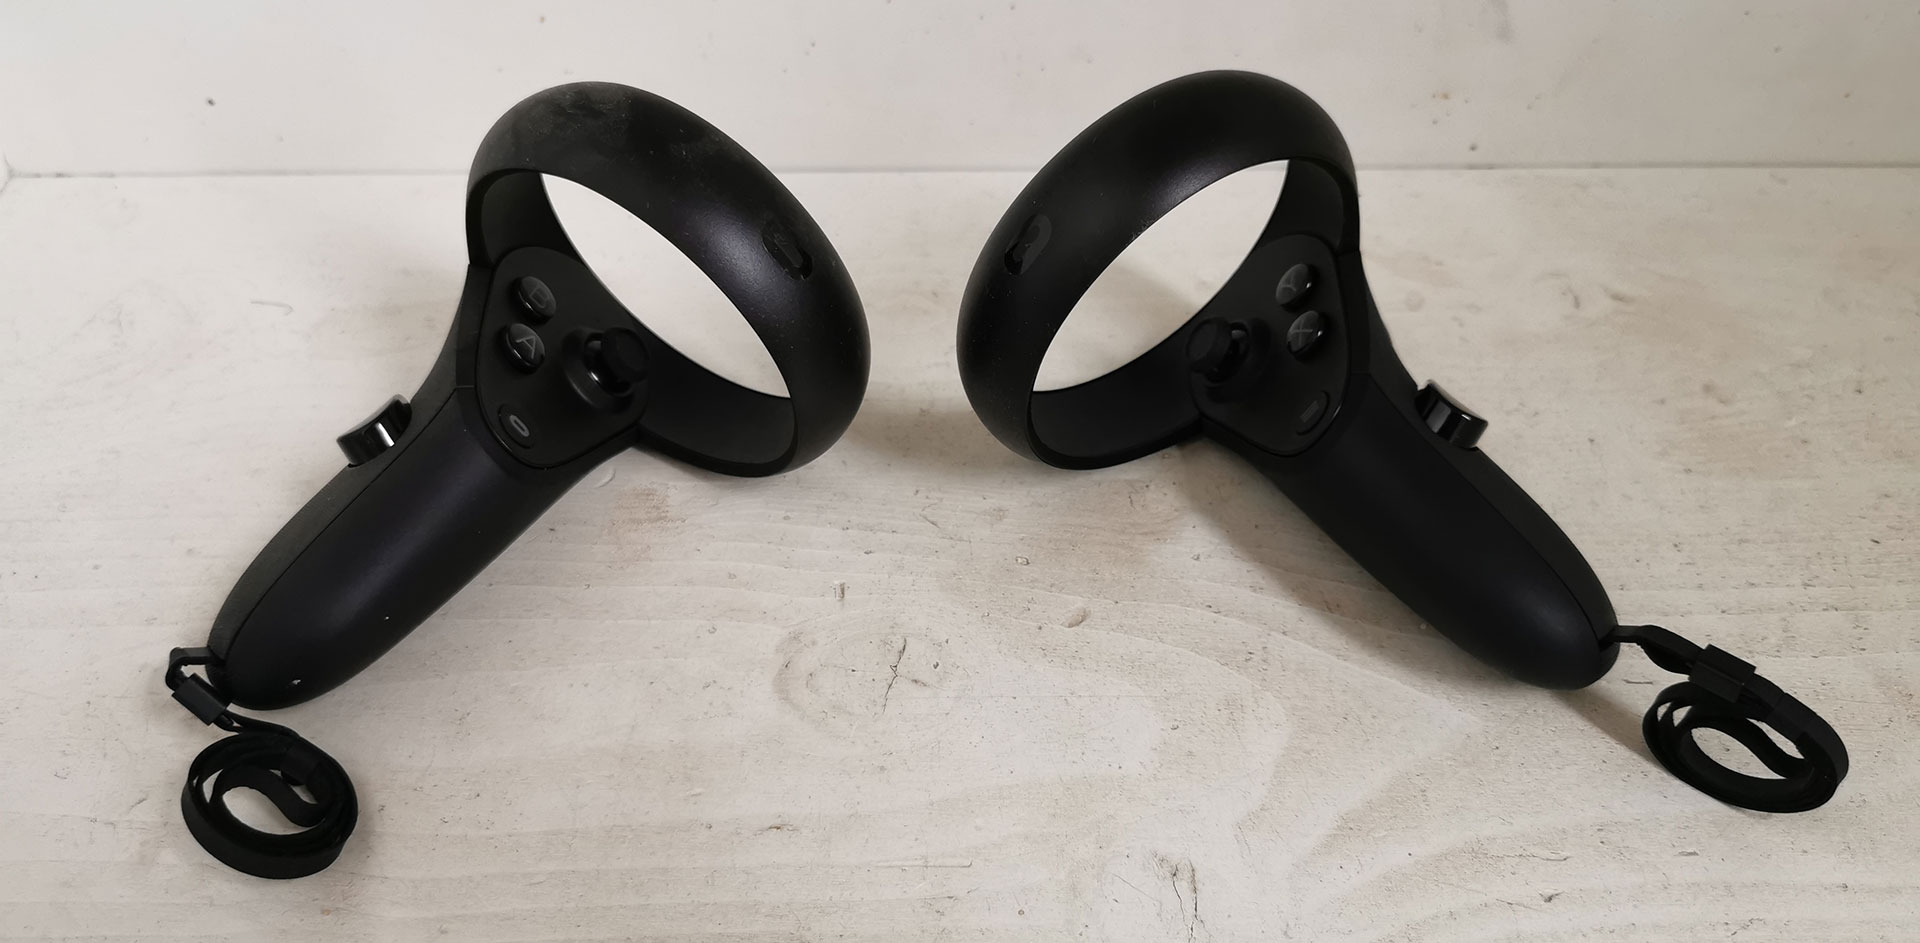 Oculus Touch Controllers